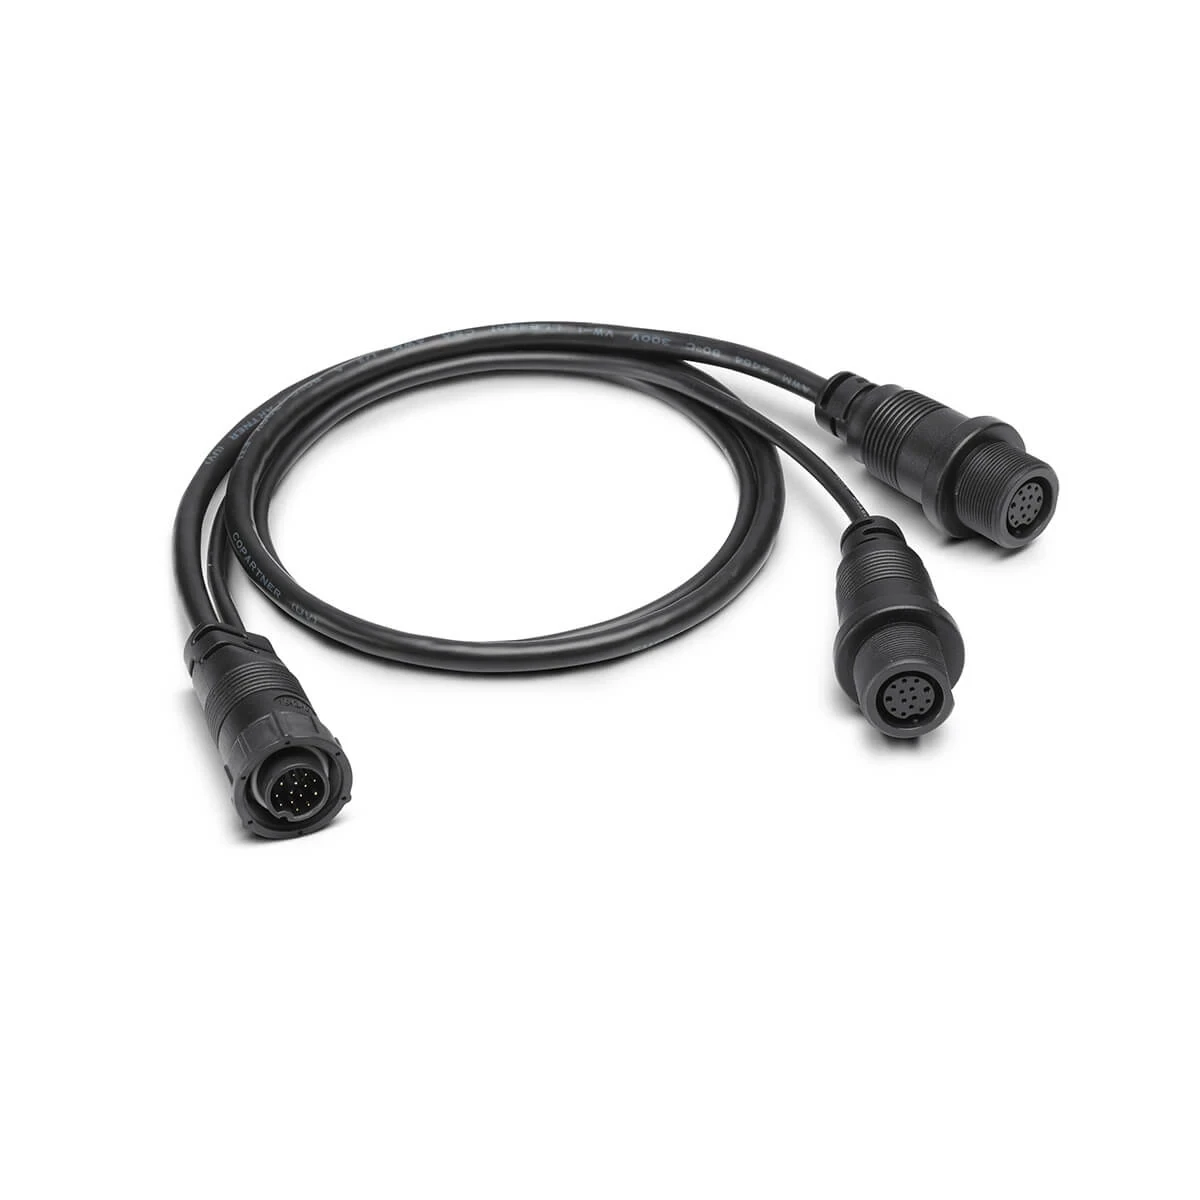 14 M ID SIDB Y - Side Imaging Left-Right Splitter Cable